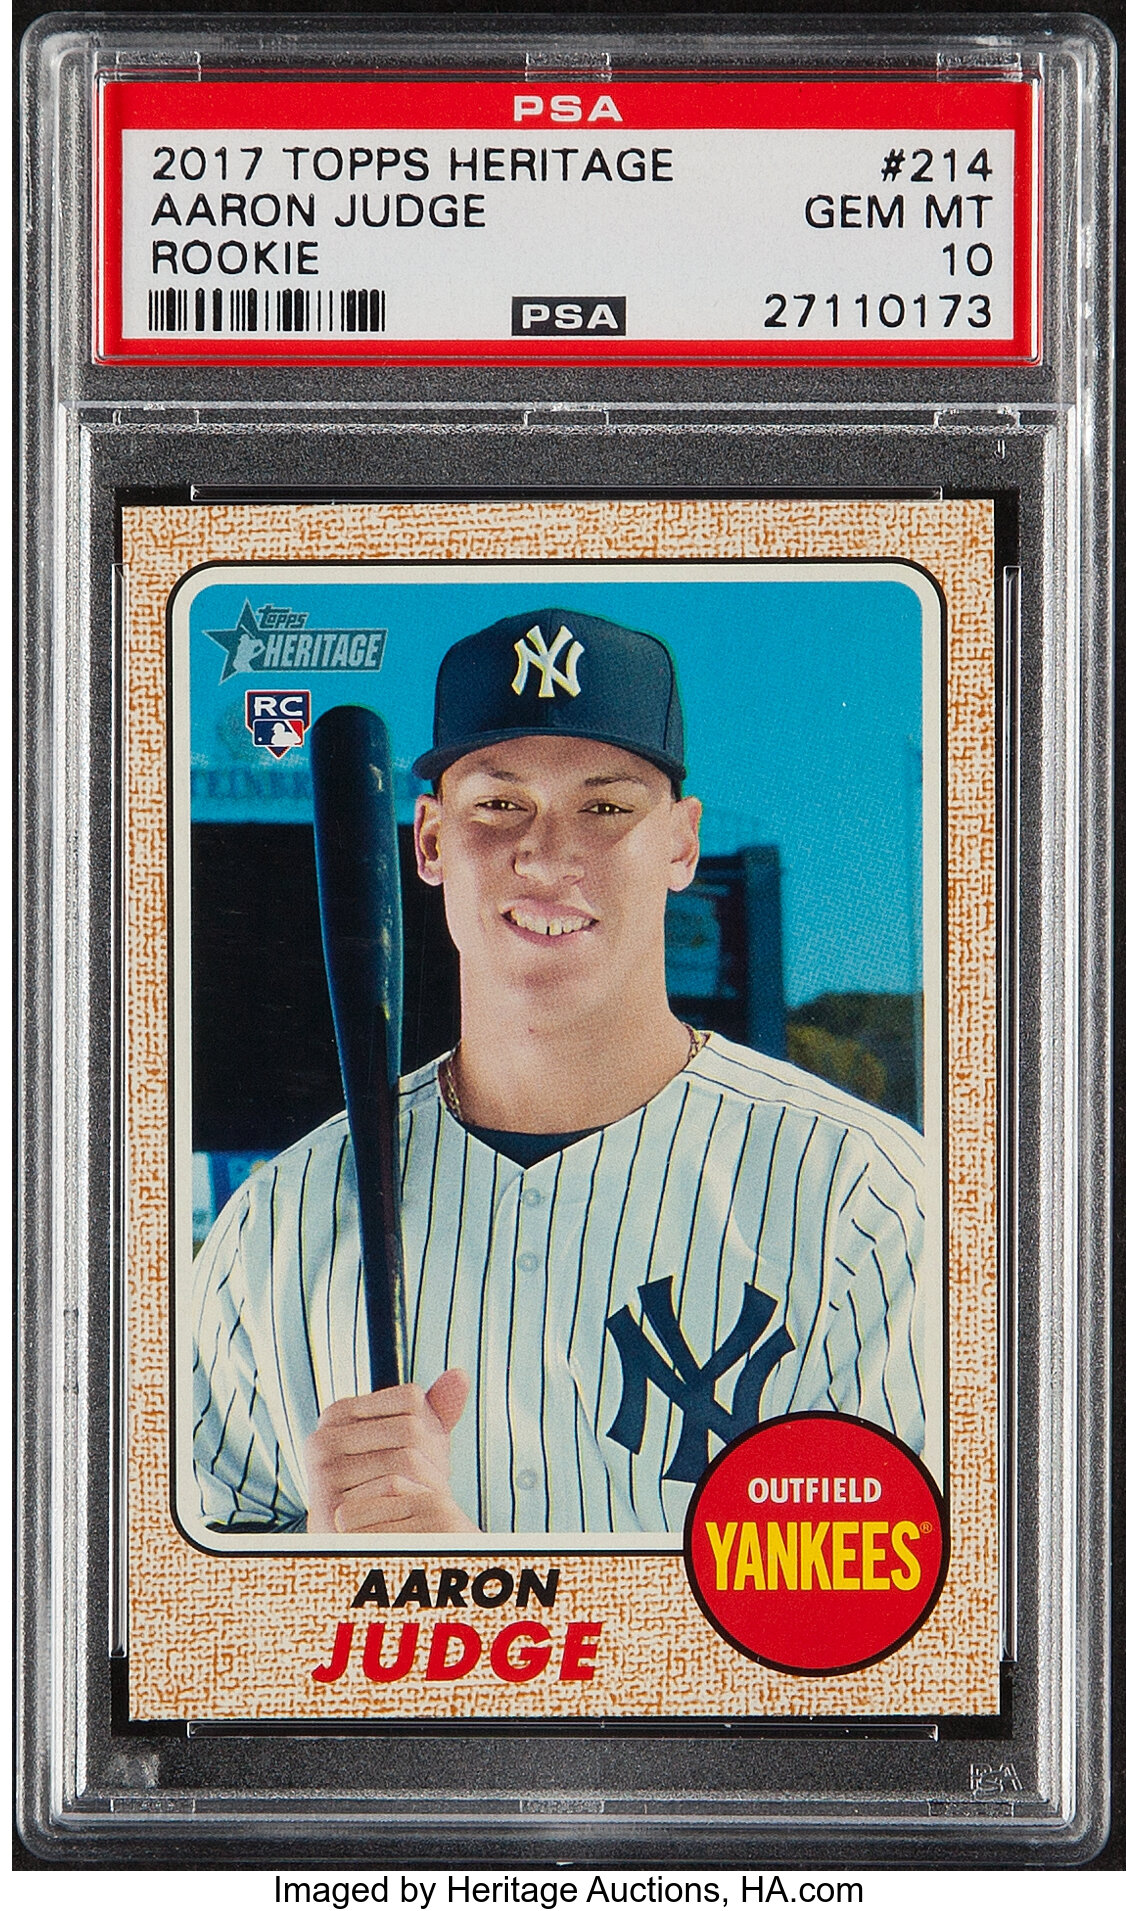 Sold at Auction: Gem Mint 10 AARON JUDGE Rookie Baseball Card